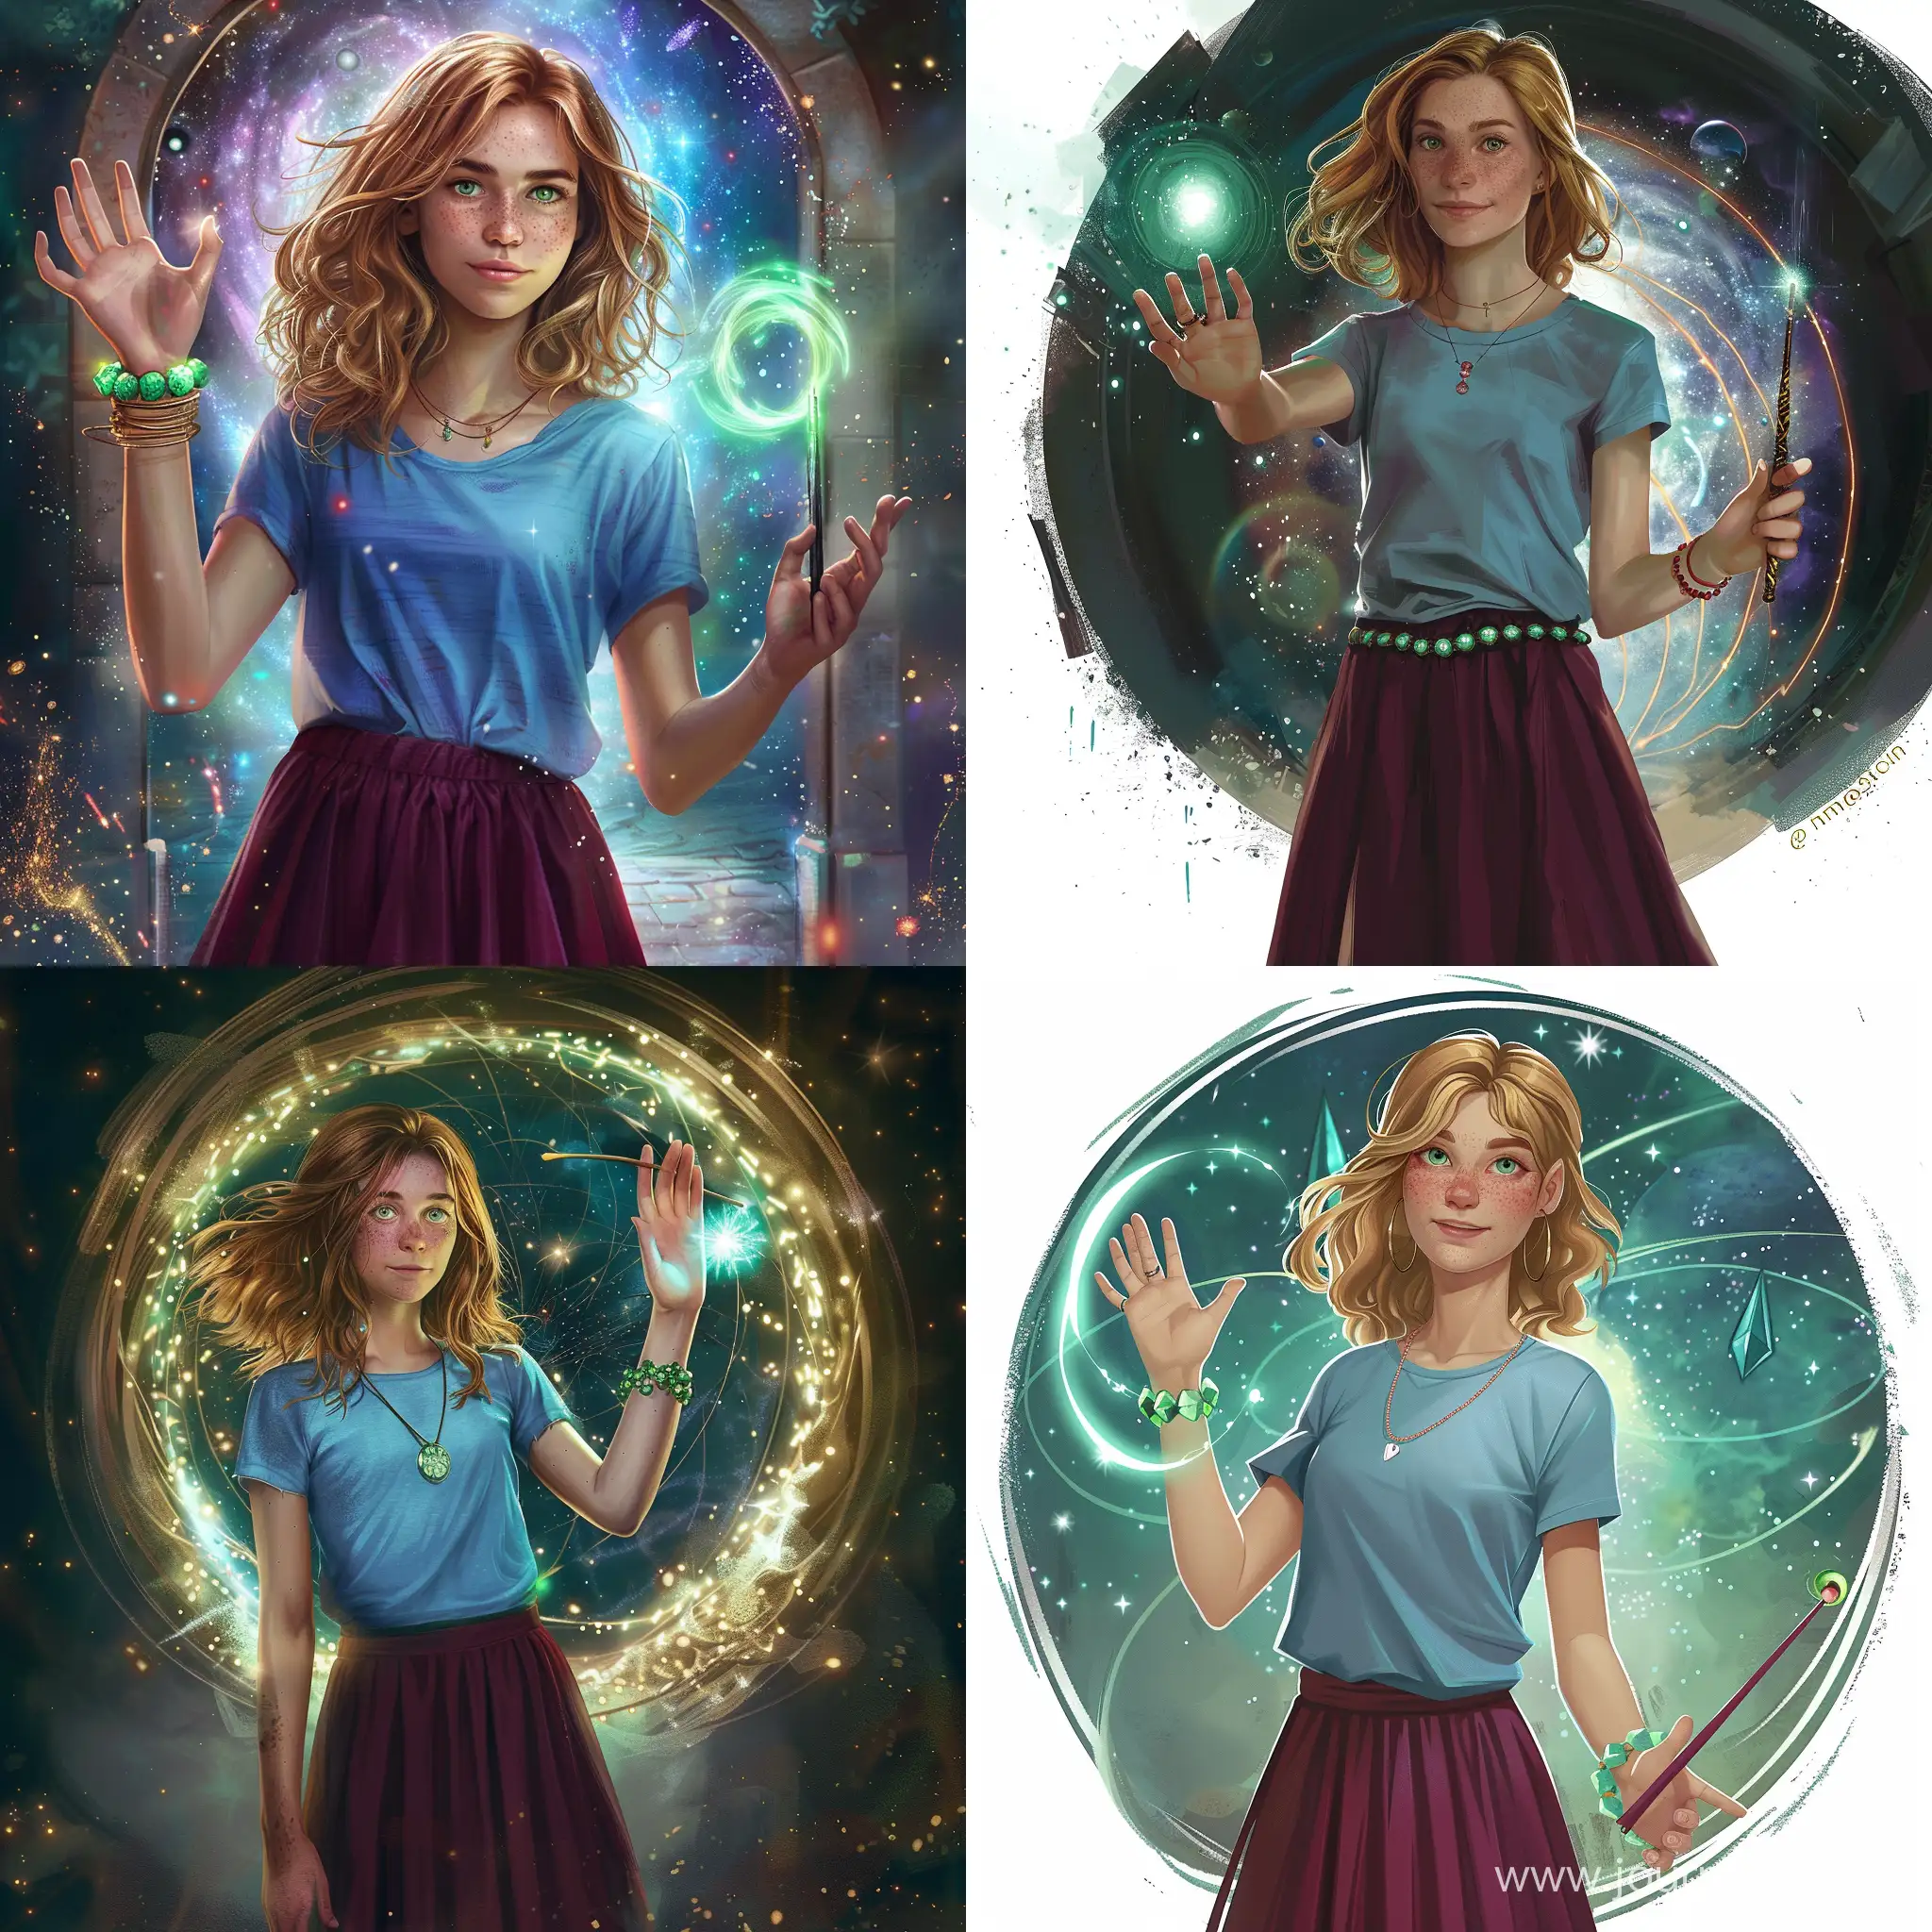 Enchanting-Girl-with-GreenGlowing-Bracelet-and-Magic-Wand-Summoning-Portals-to-Other-Galaxies